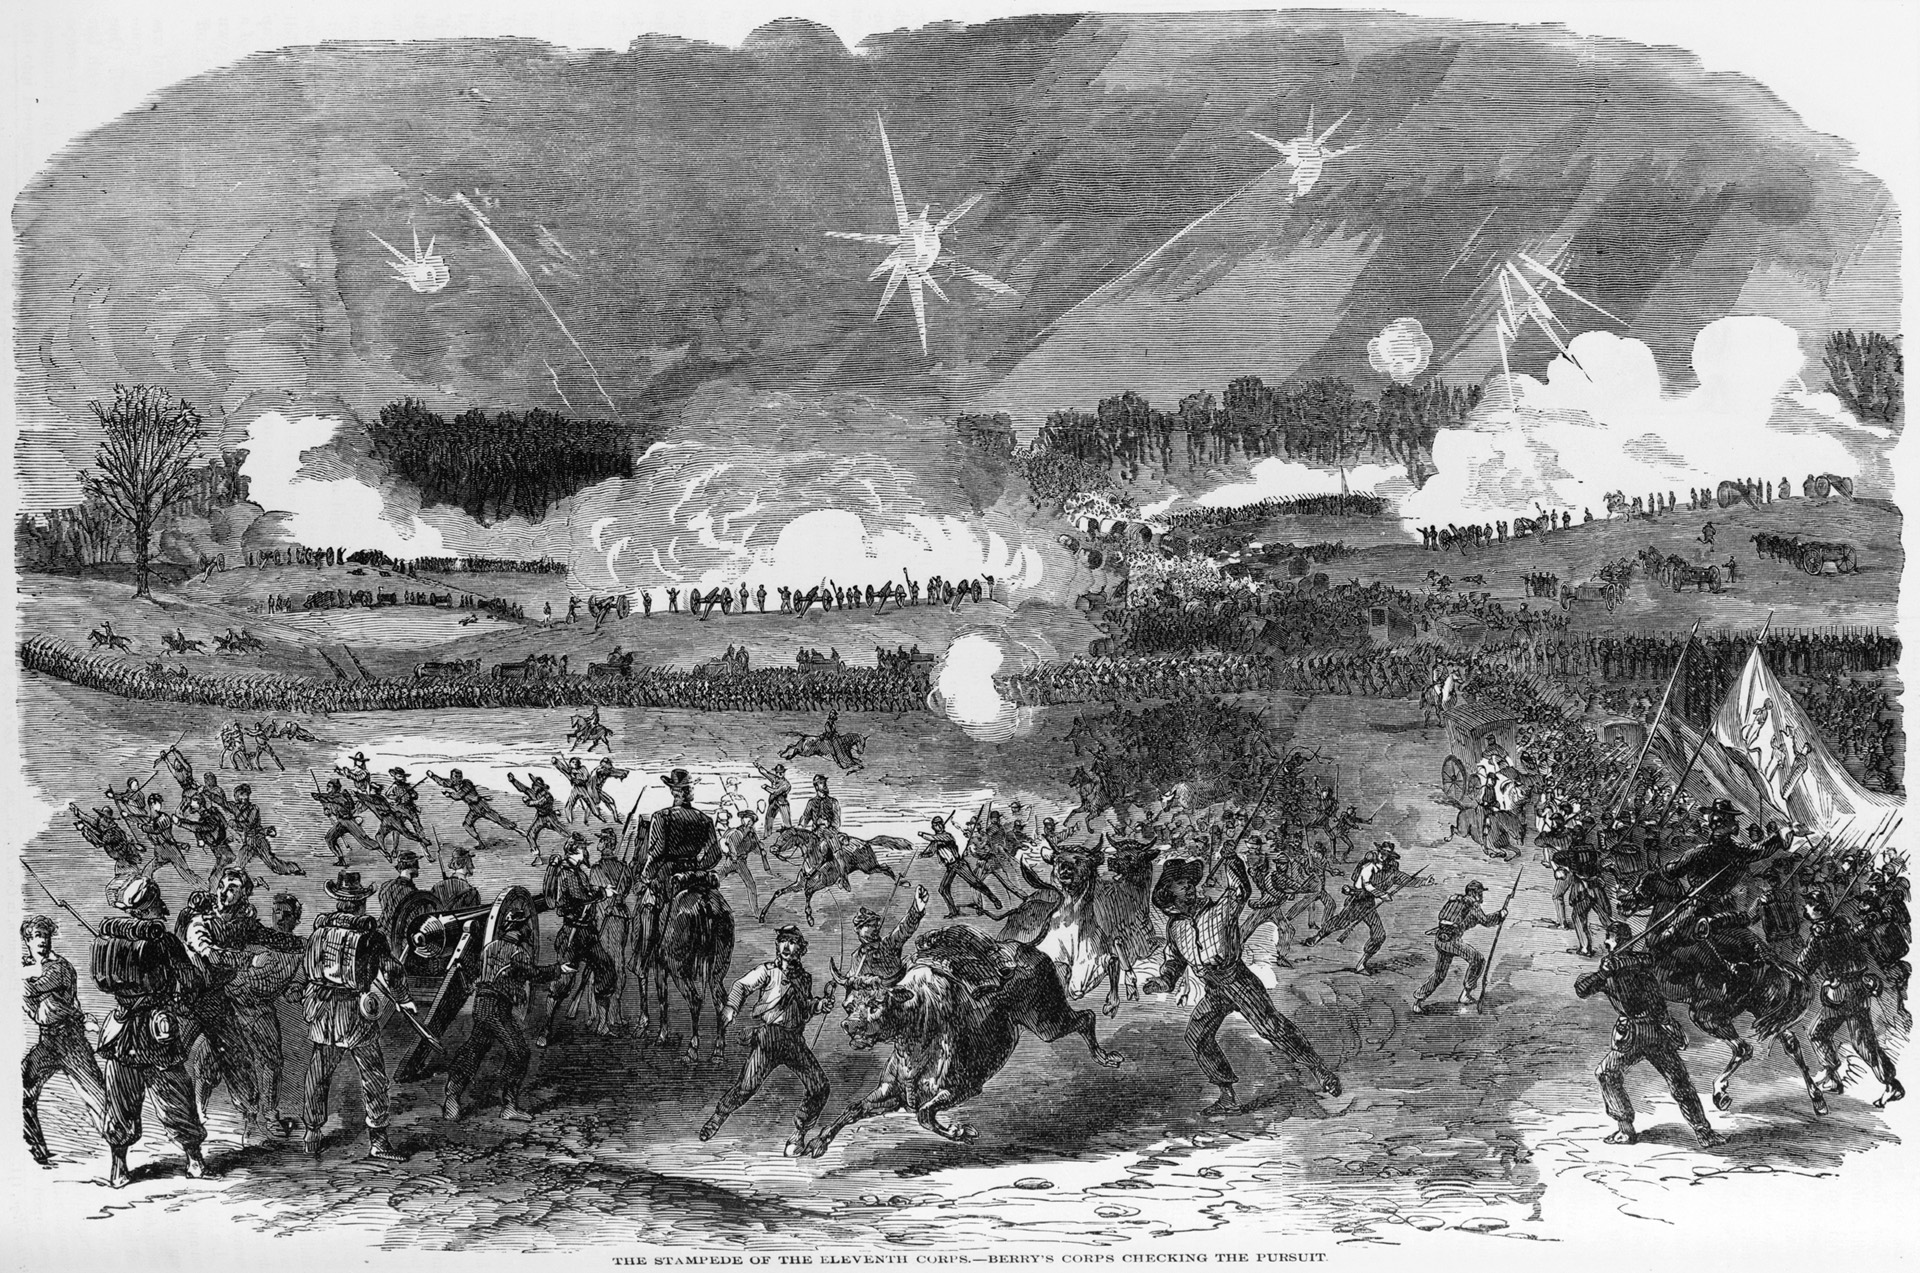 Other units of Hooker’s army plug the gap created by the rout of Howard’s XI Corps. Jackson’s corps was unable to press its advantage in the fading daylight, and the arrival that night of Union Maj. Gen. John Reynolds’s I Corps helped stabilize the precarious Union position. 